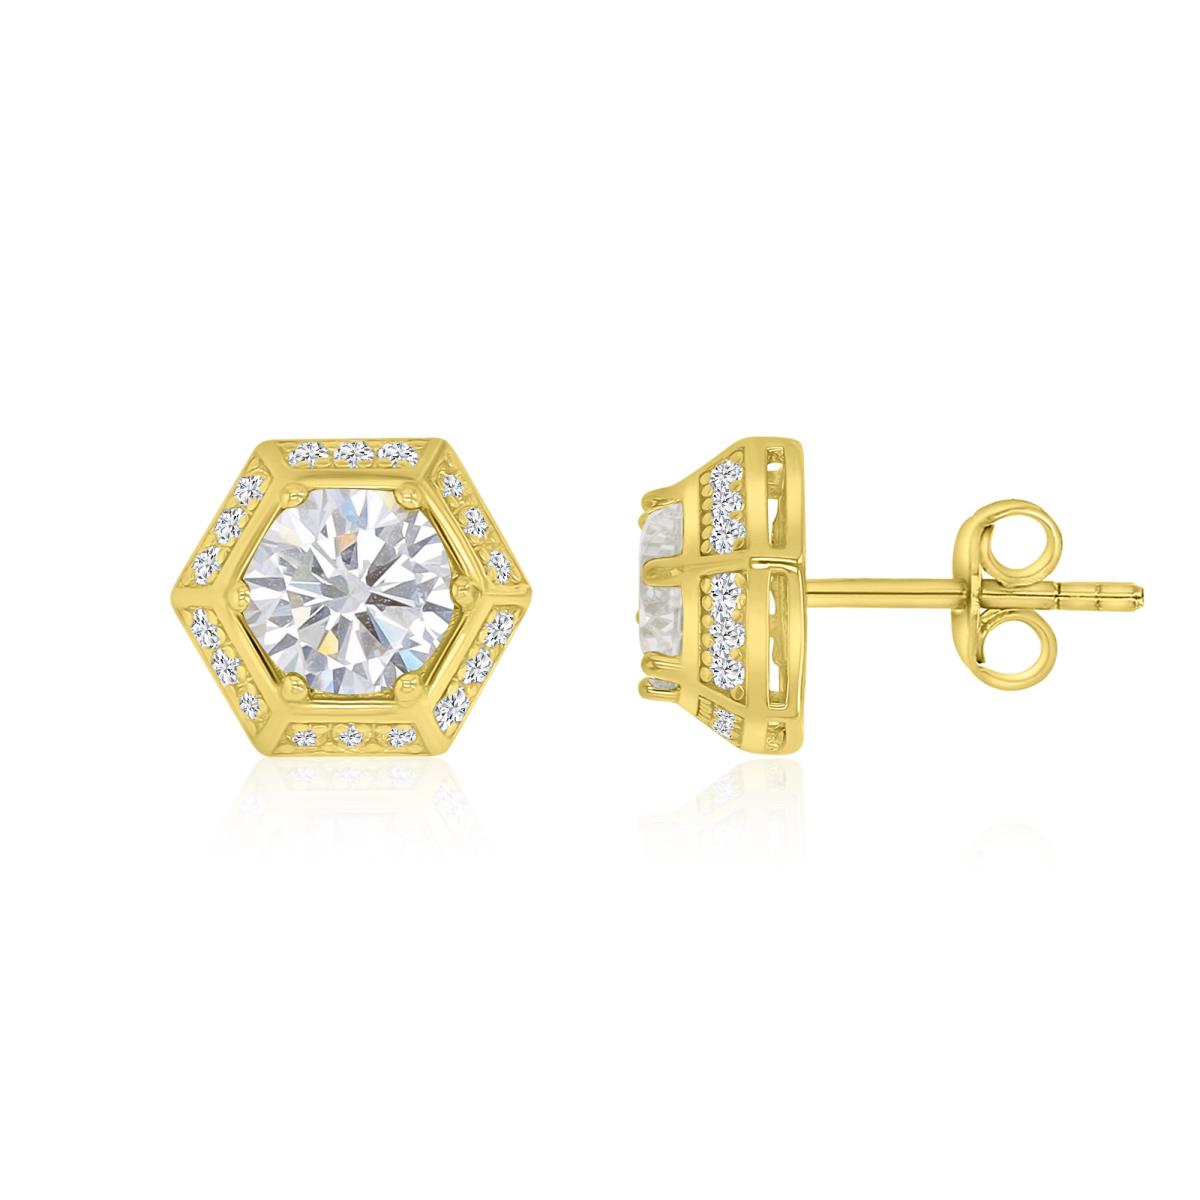 Sterling Silver Yellow 1M 9X5MM Polished White CZ Octagon Stud Earrings